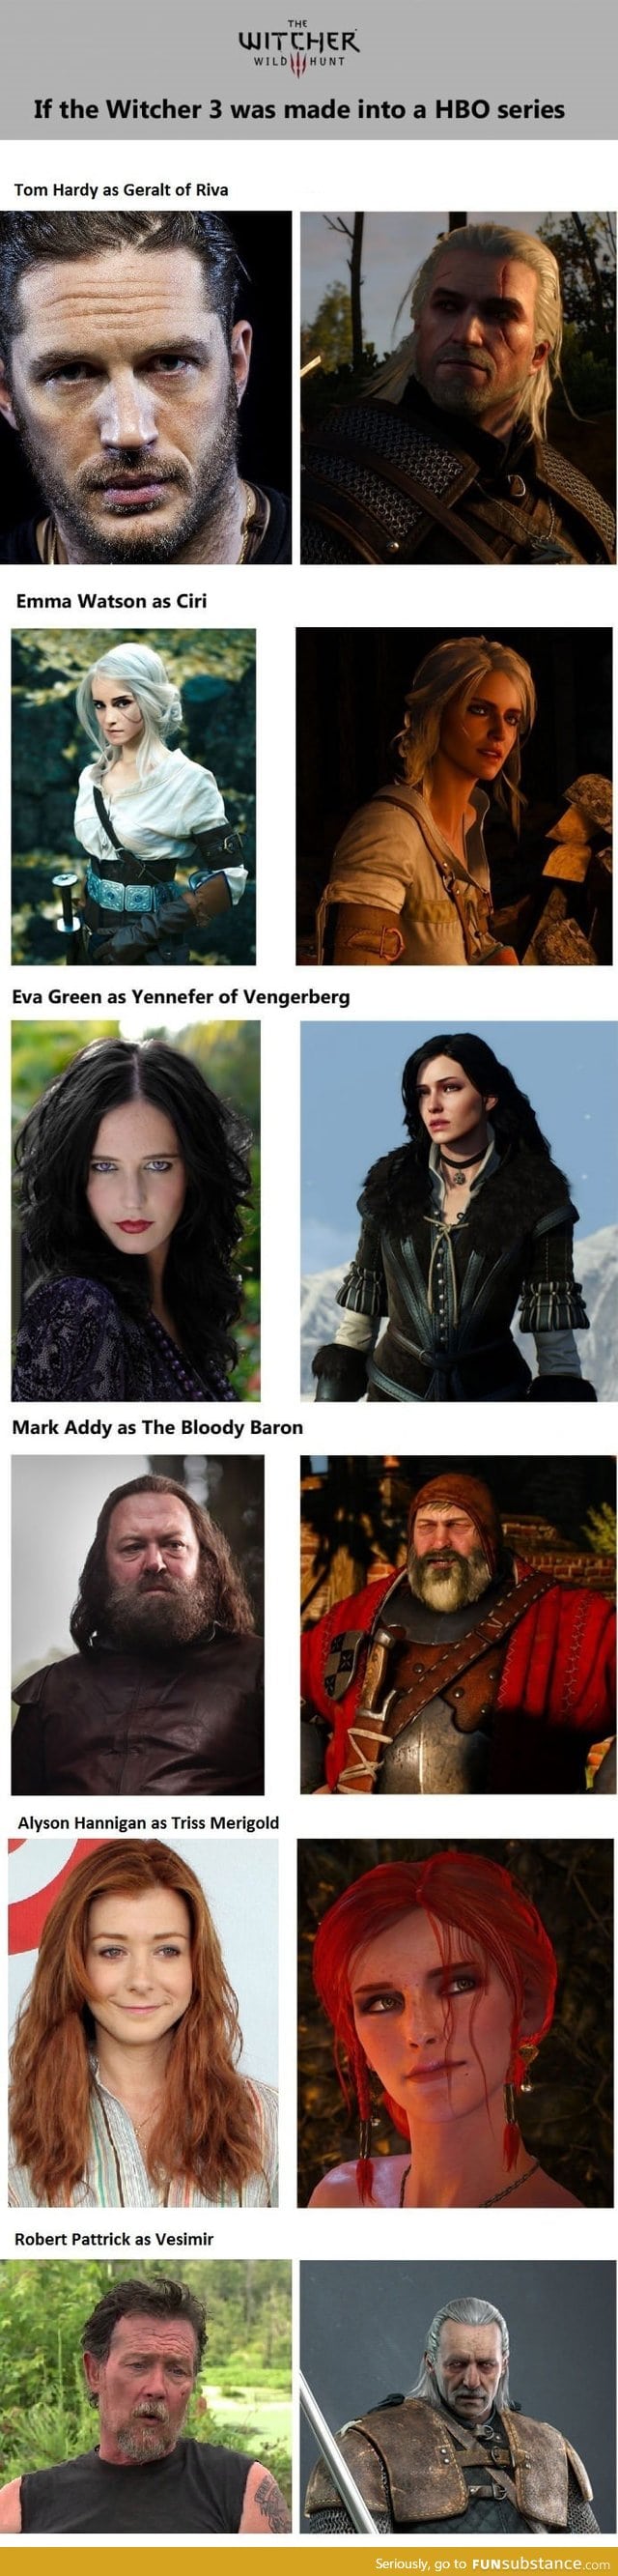 If Witcher 3 was a HBO series - Alternative Cast